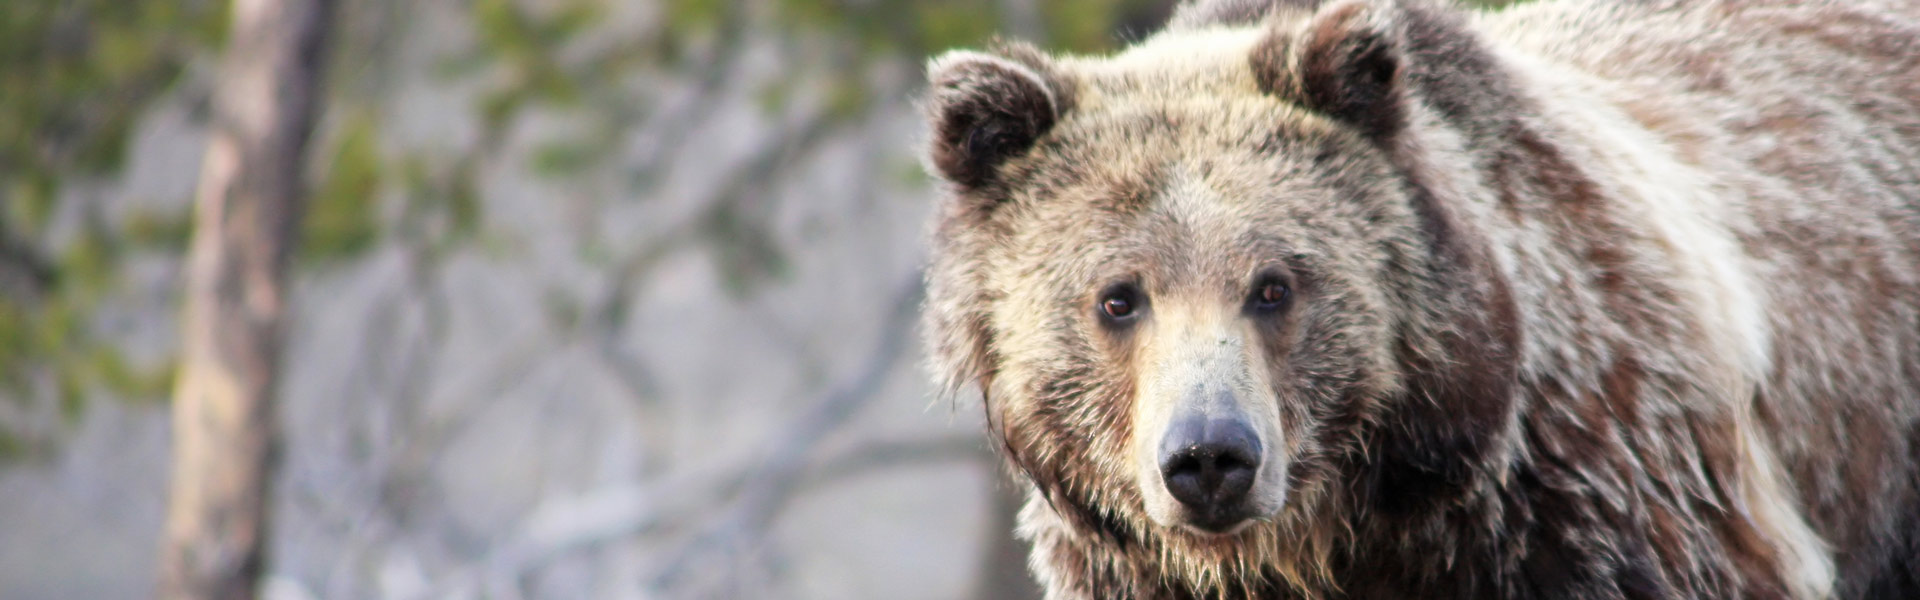 How To Deal With Brown Bears